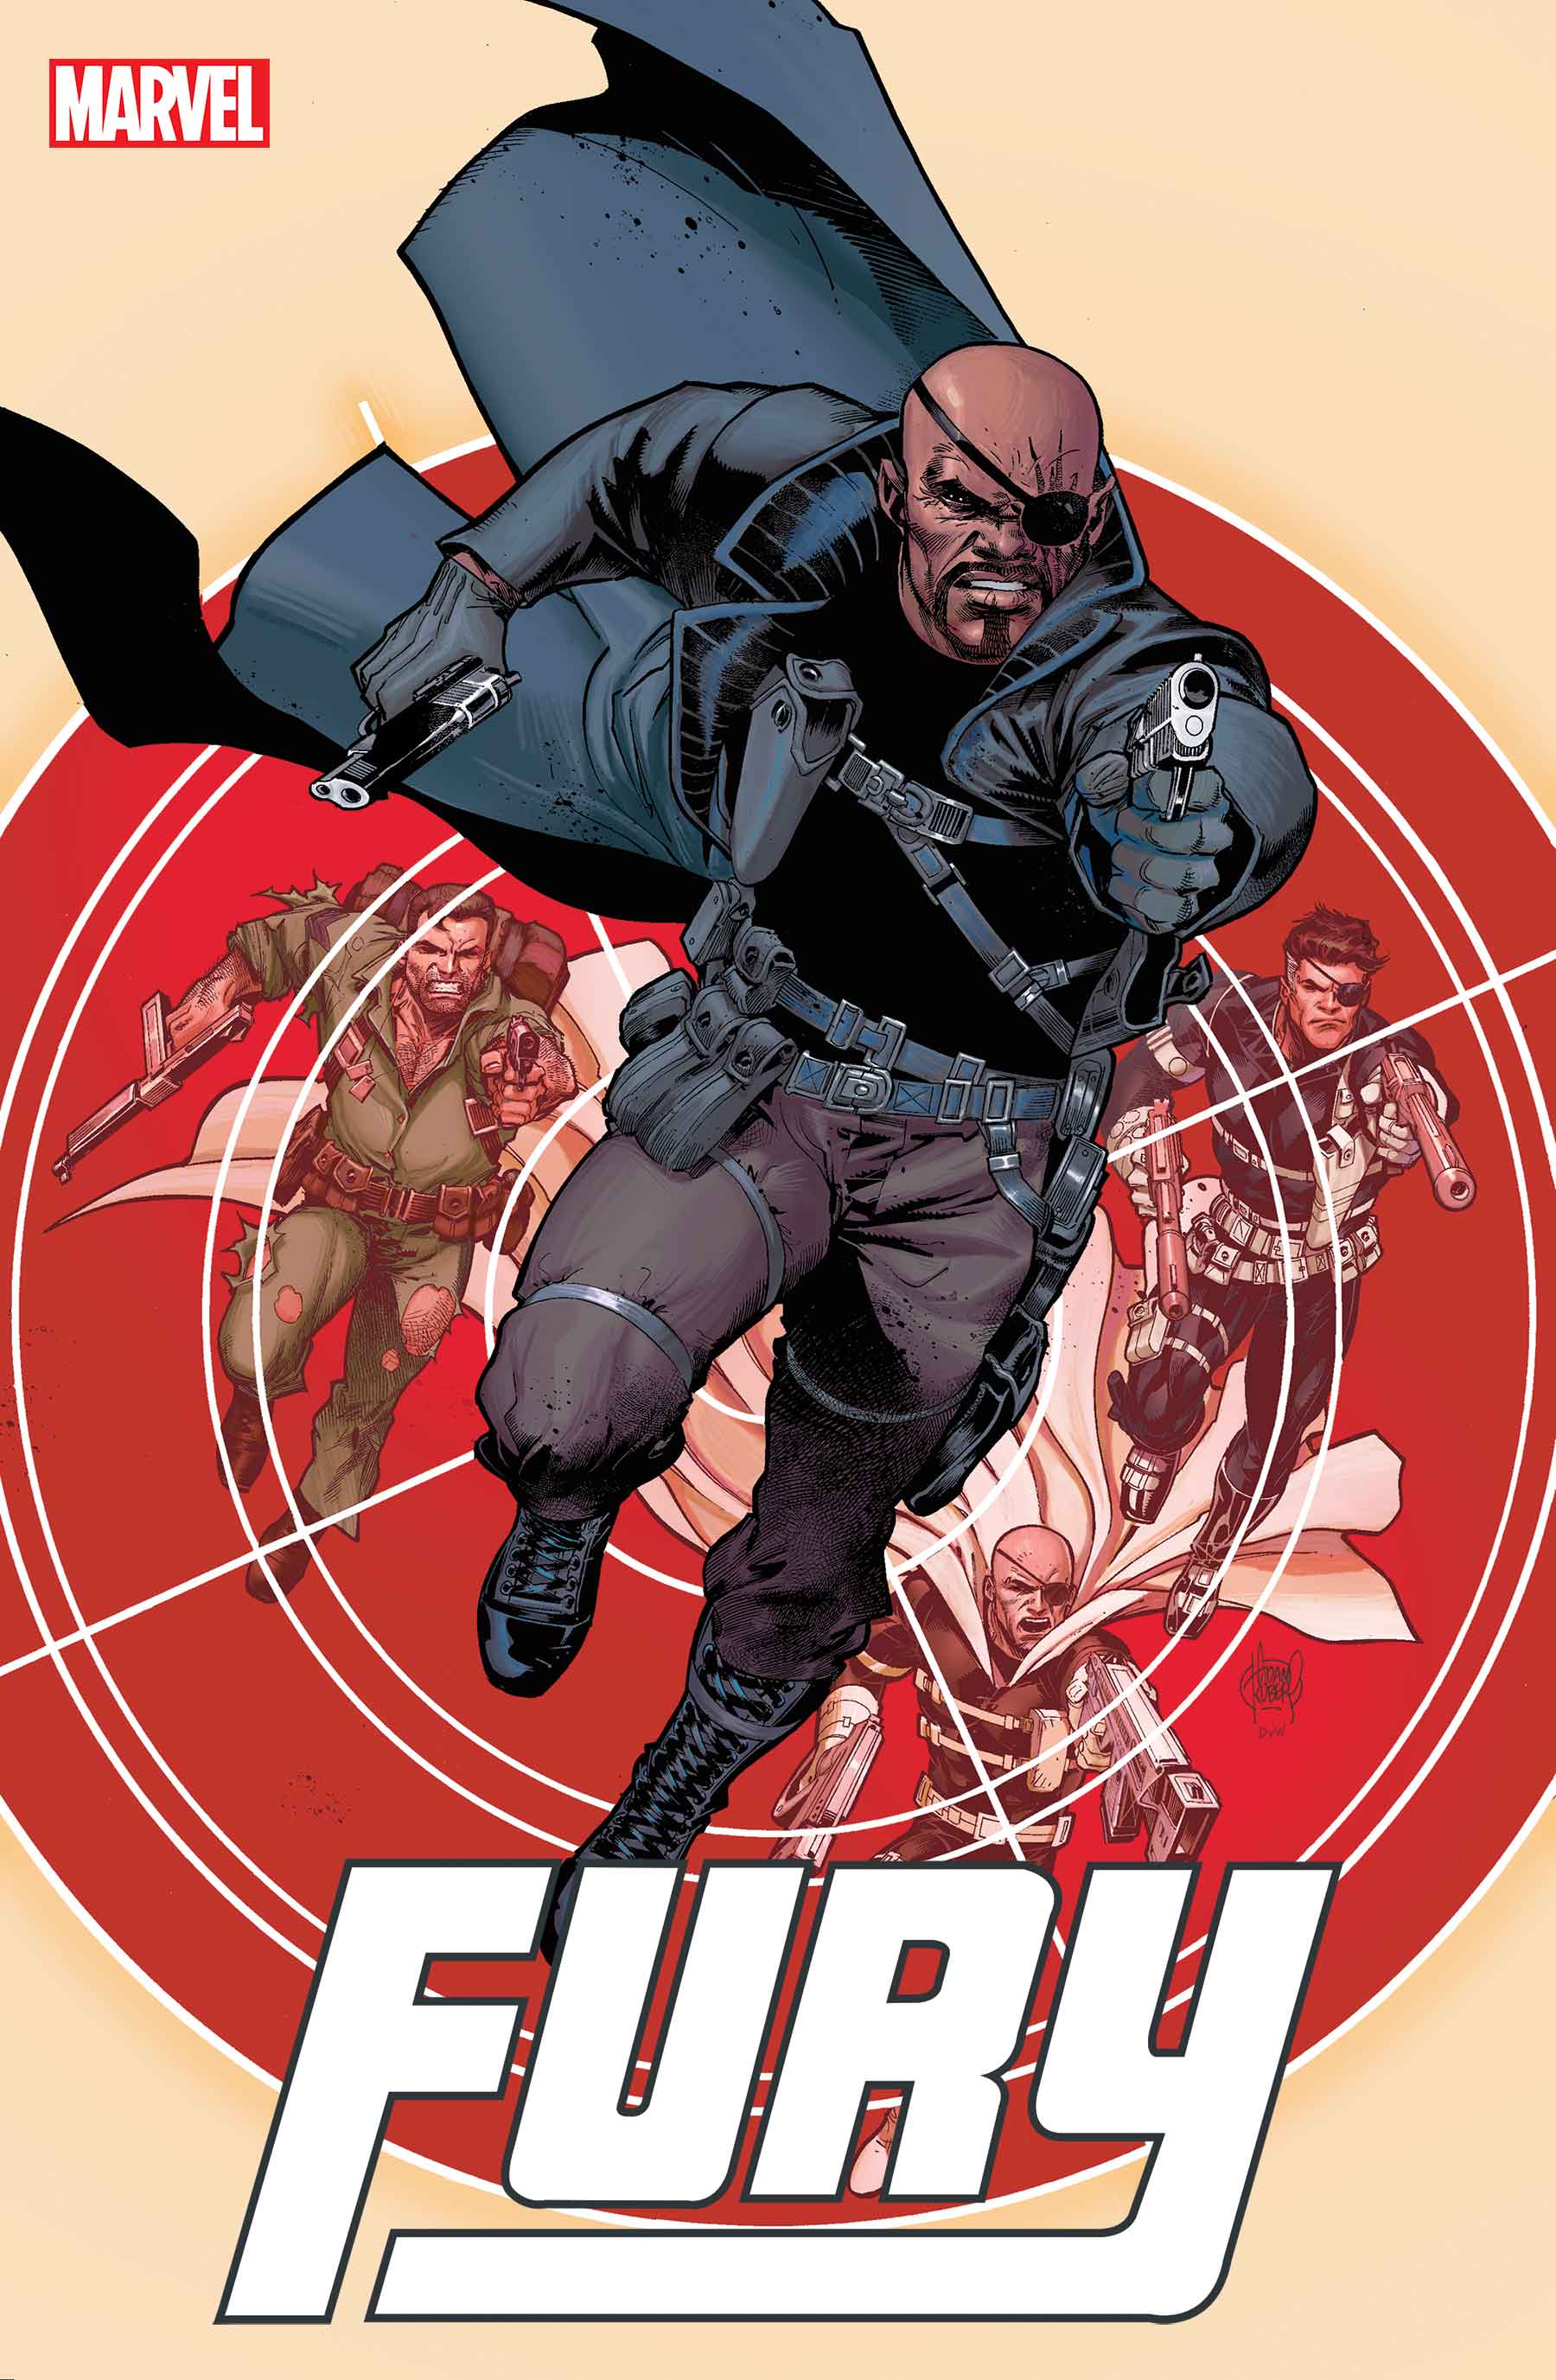 Fury #1 cover